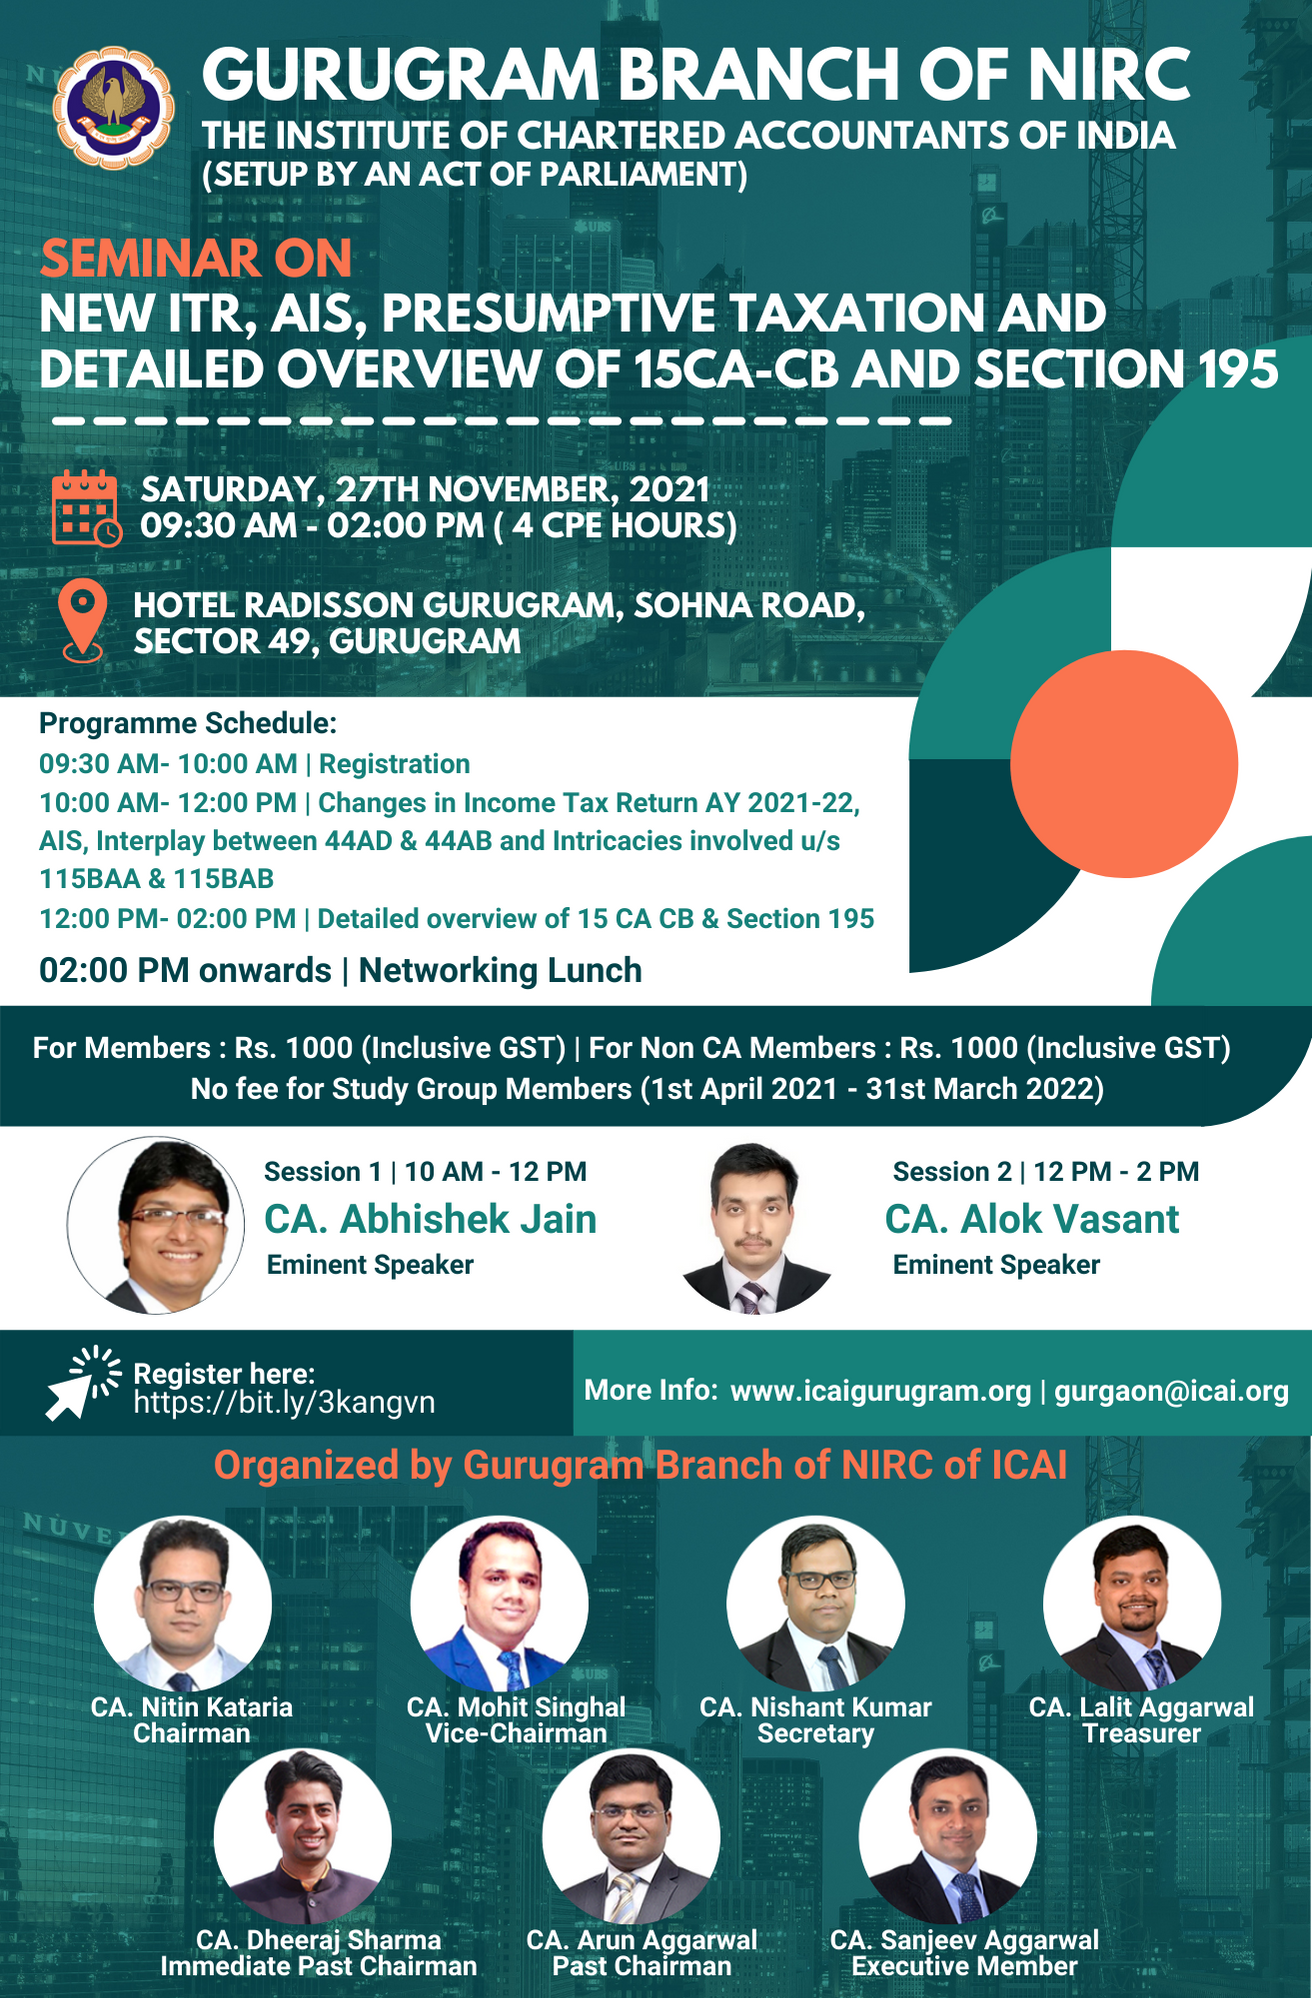 Seminar on New ITR, AIS, Presumptive Taxation and detailed overview of 15CA-CB and Section 195